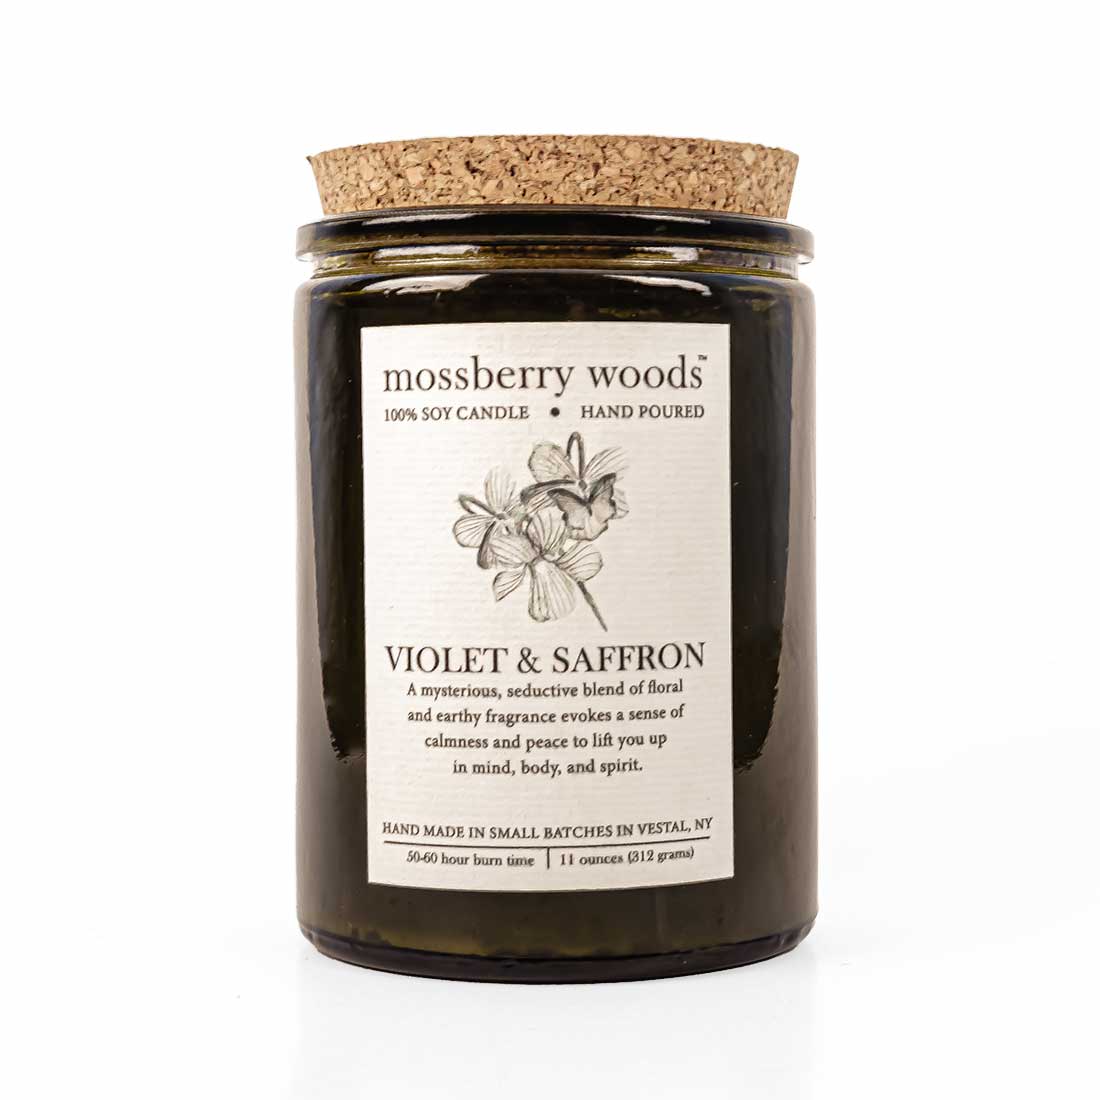 Violet & Saffron soy candle in green rustic jar with a cork lid